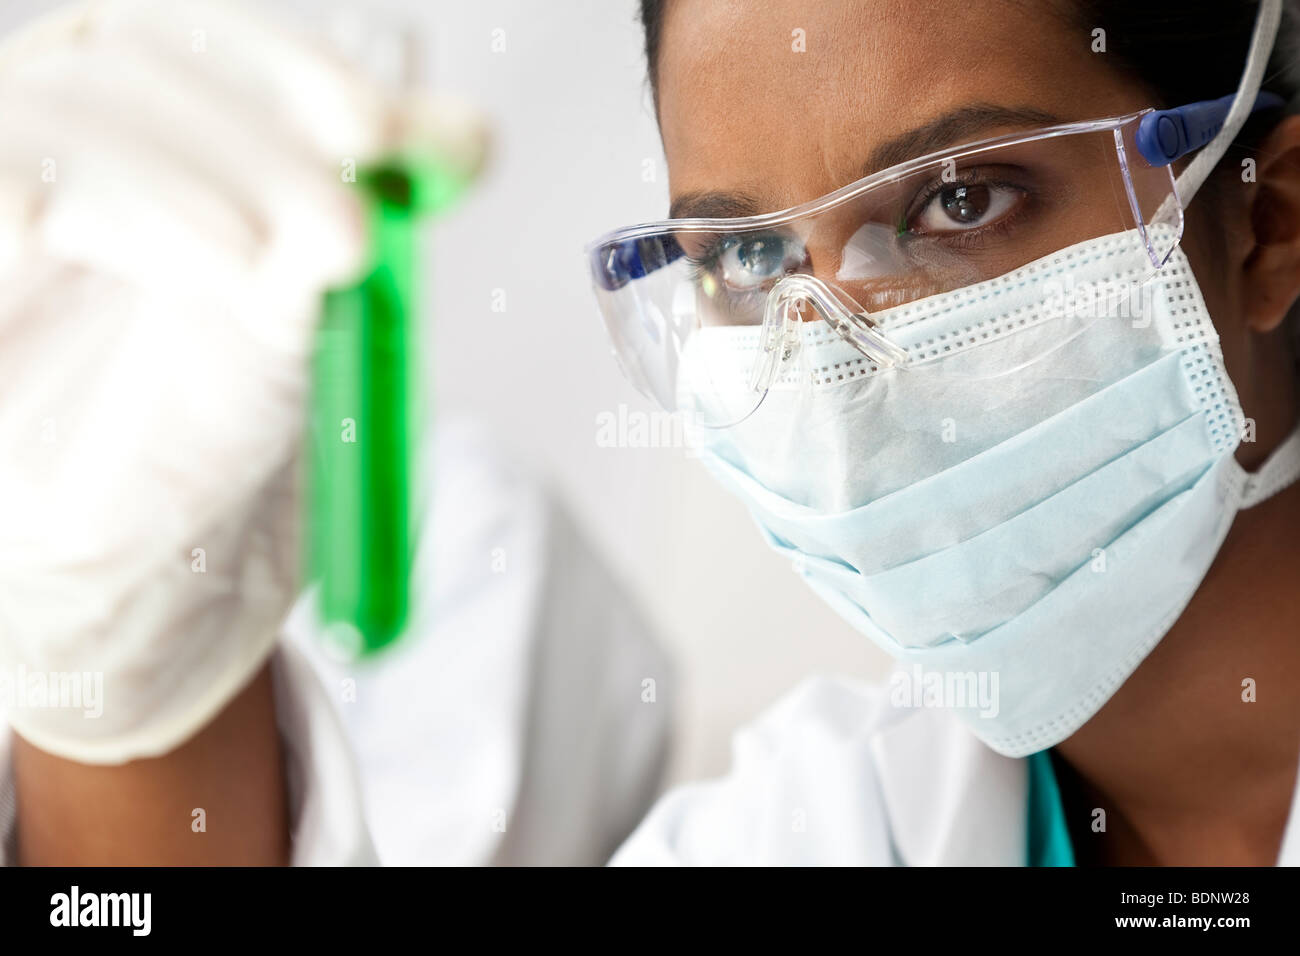 An Asian medical or scientific researcher or doctor looking at a test tube of green solution in a laboratory. Stock Photo